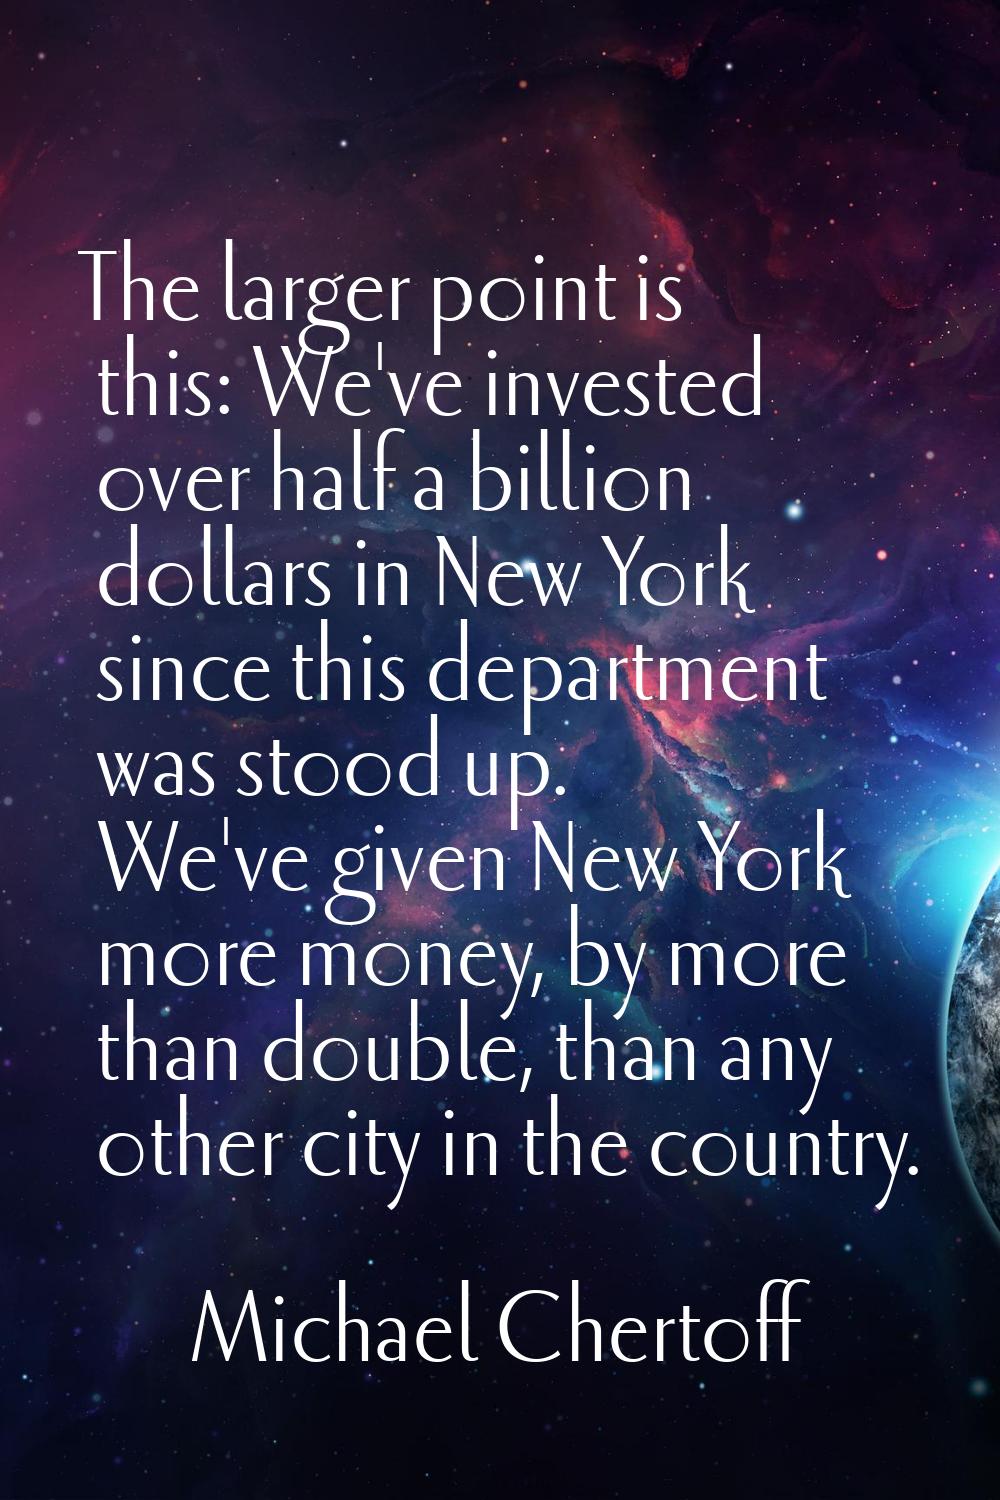 The larger point is this: We've invested over half a billion dollars in New York since this departm